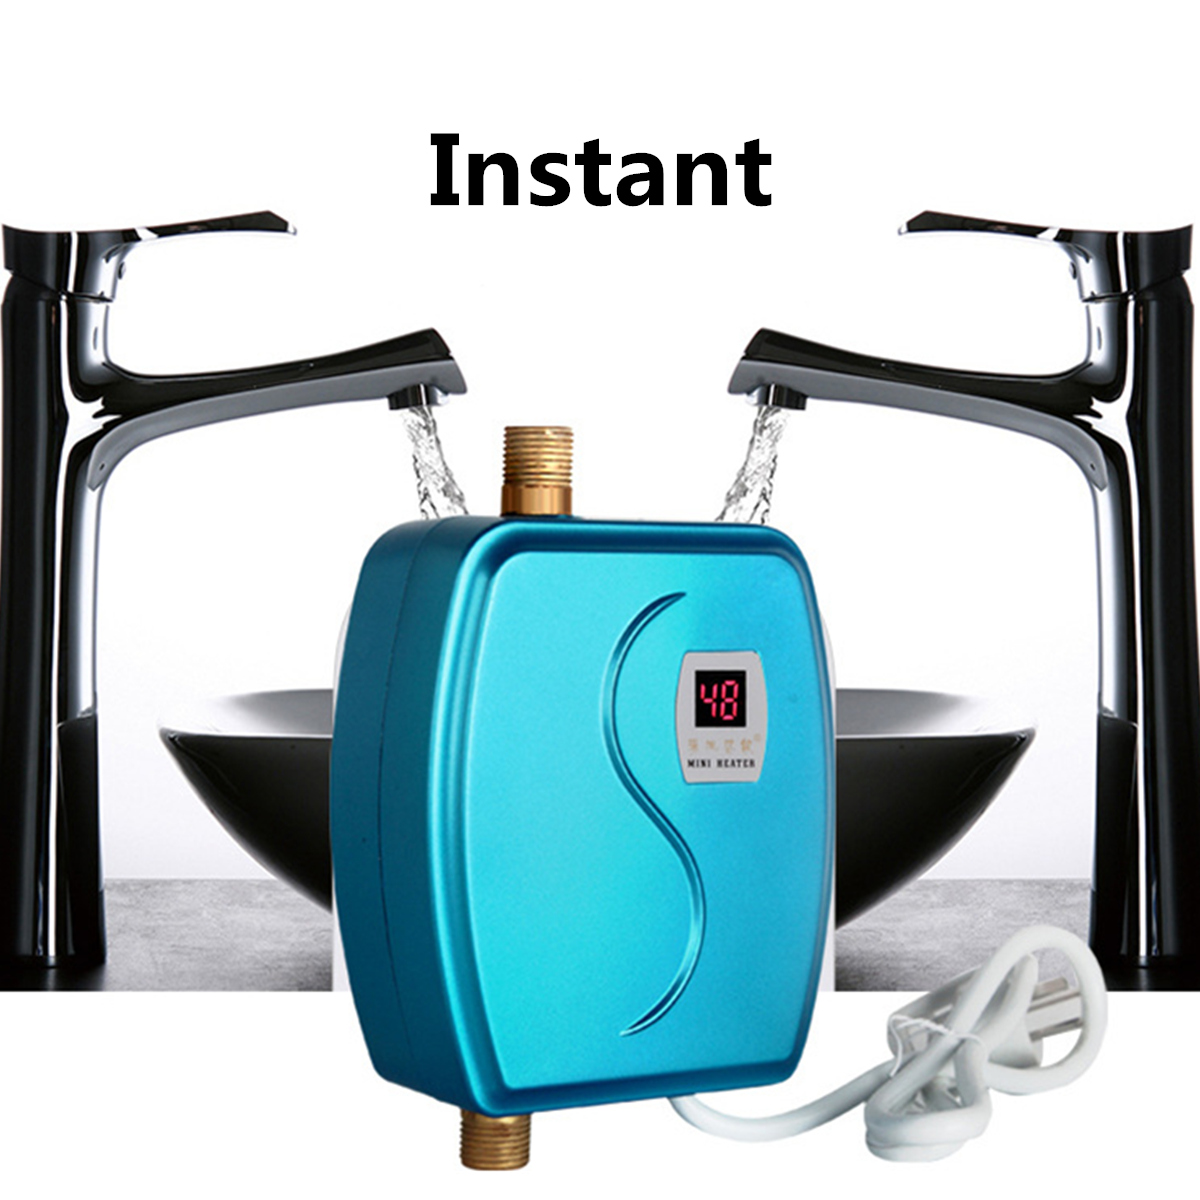 3800W-Mini-Instant-Electric-Tankless-Water-Heater-Faucet-Home-Bathroom-Sink-Tap-USEU-Plug-1406481-6